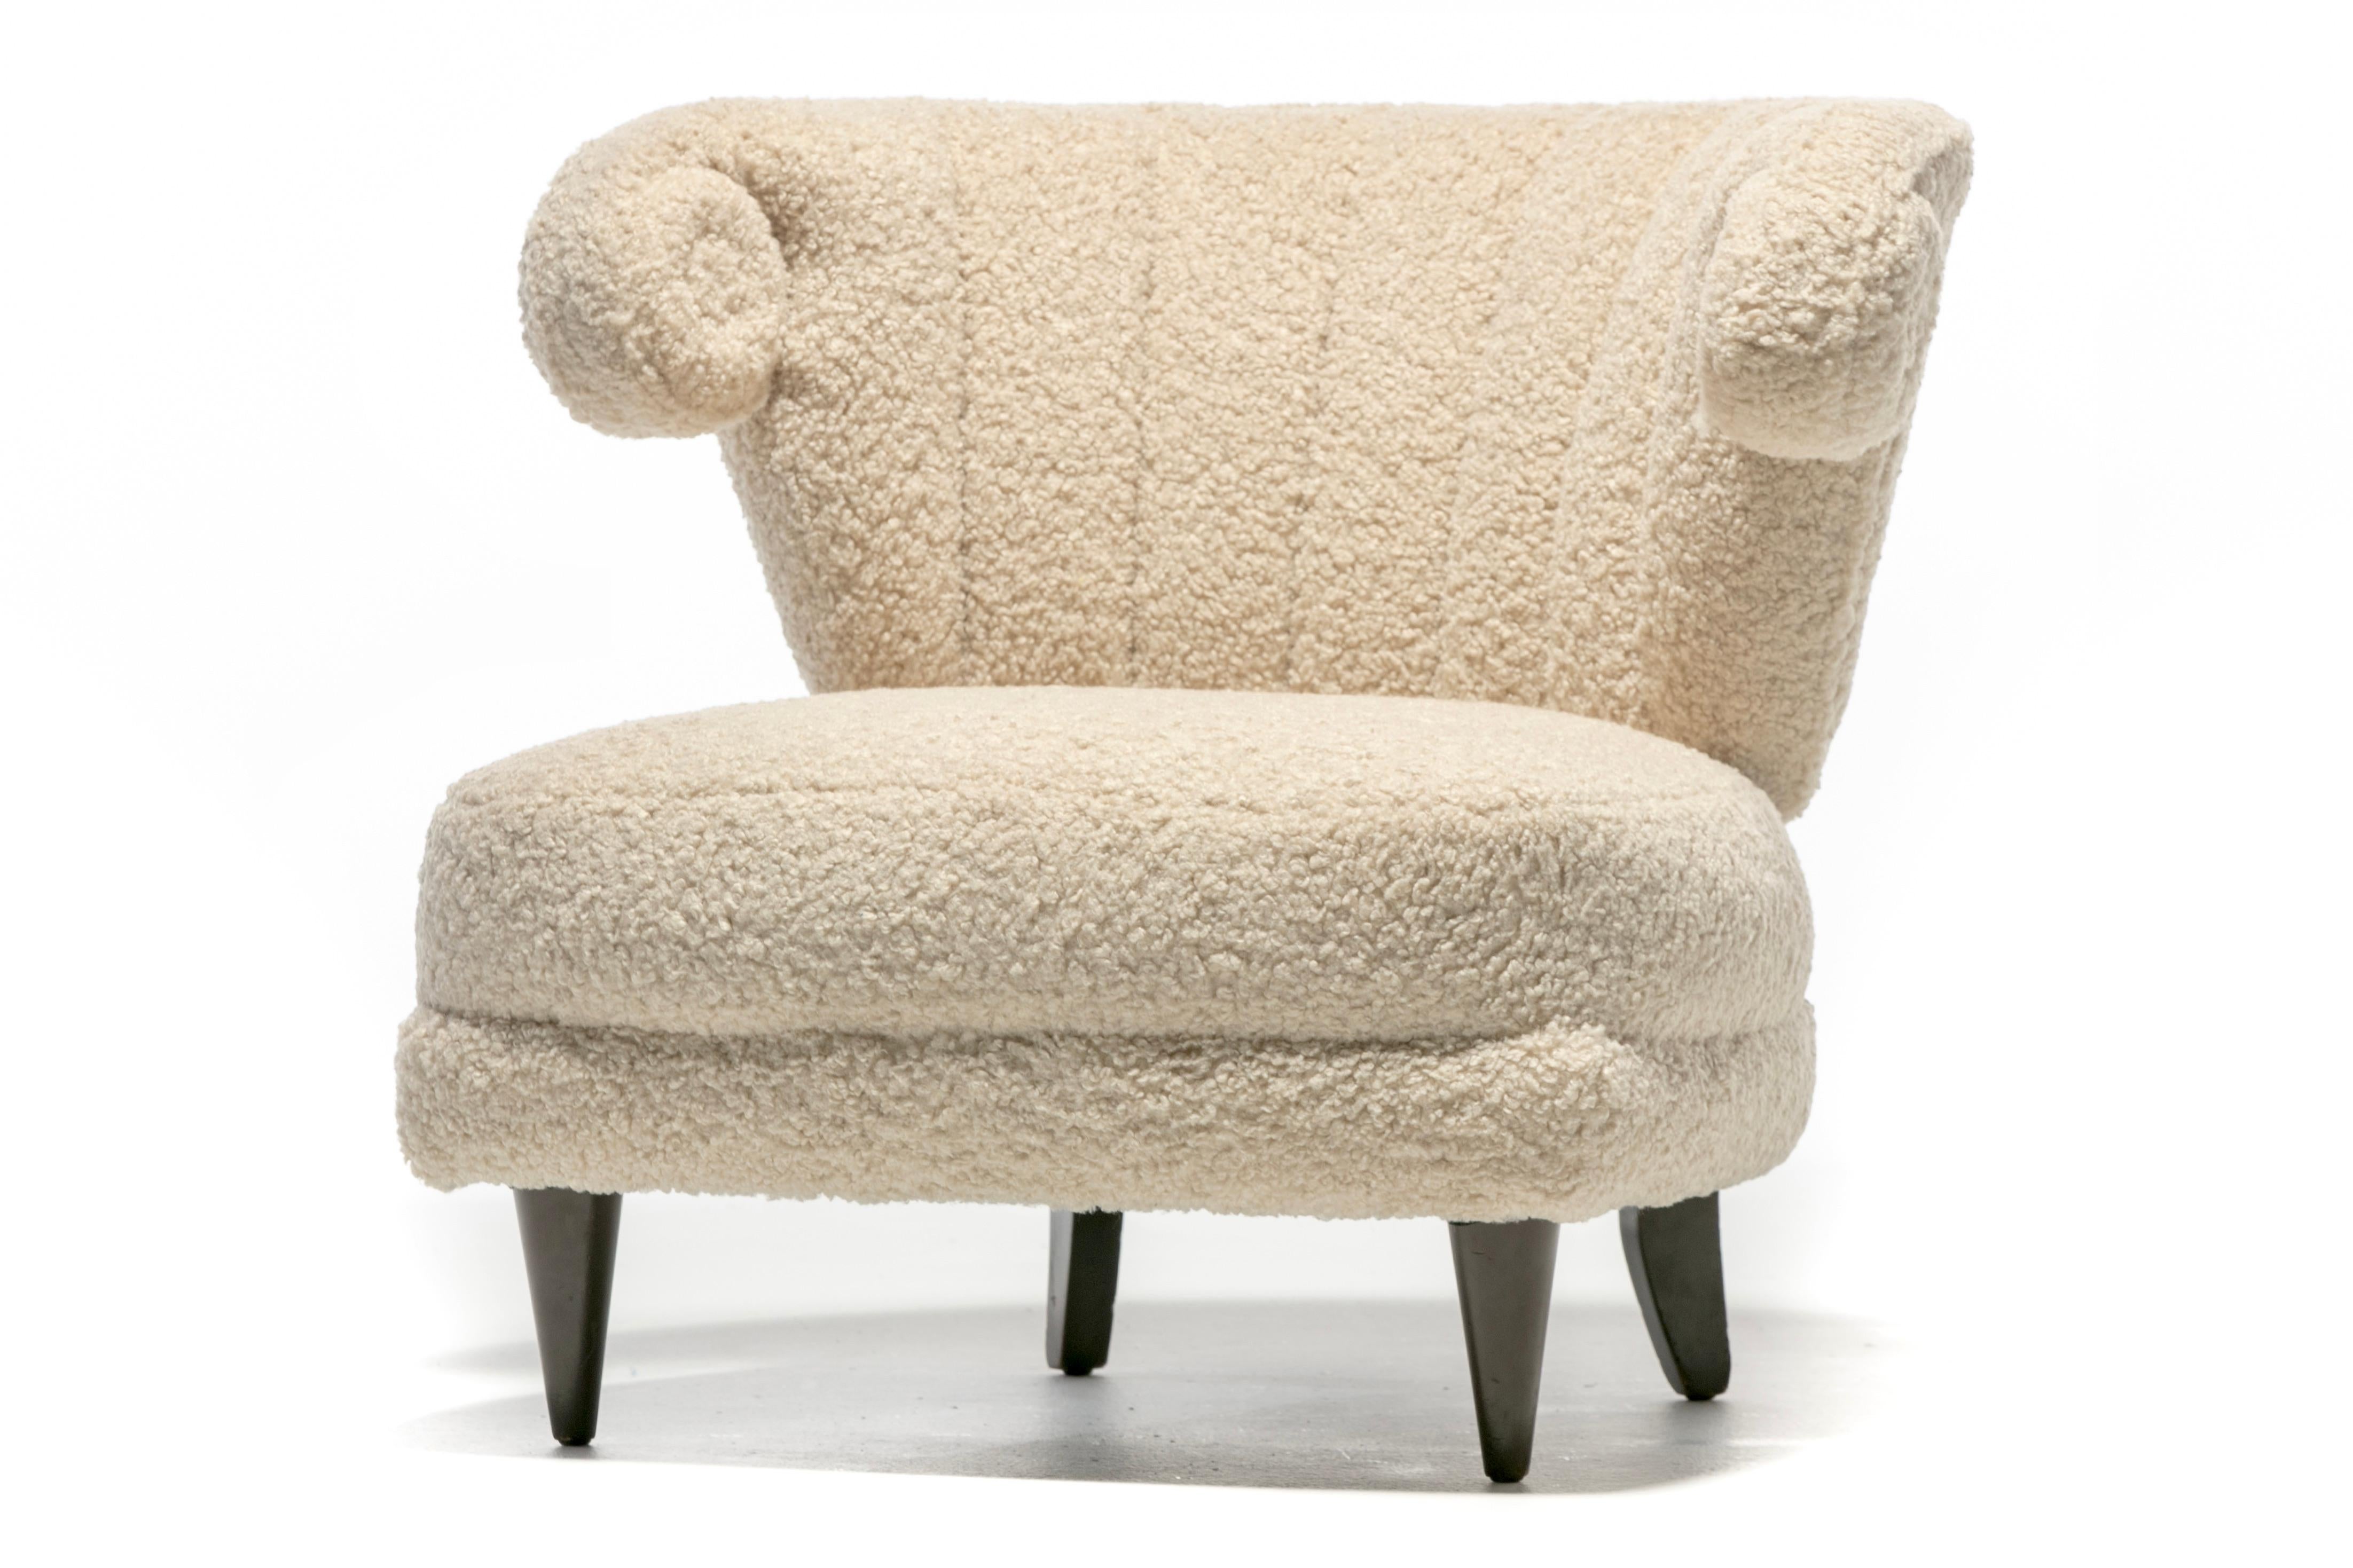 Paul Laszlo Hollywood Regency Slipper Chair in Off White Bouclé circa 1940s In Good Condition For Sale In Saint Louis, MO